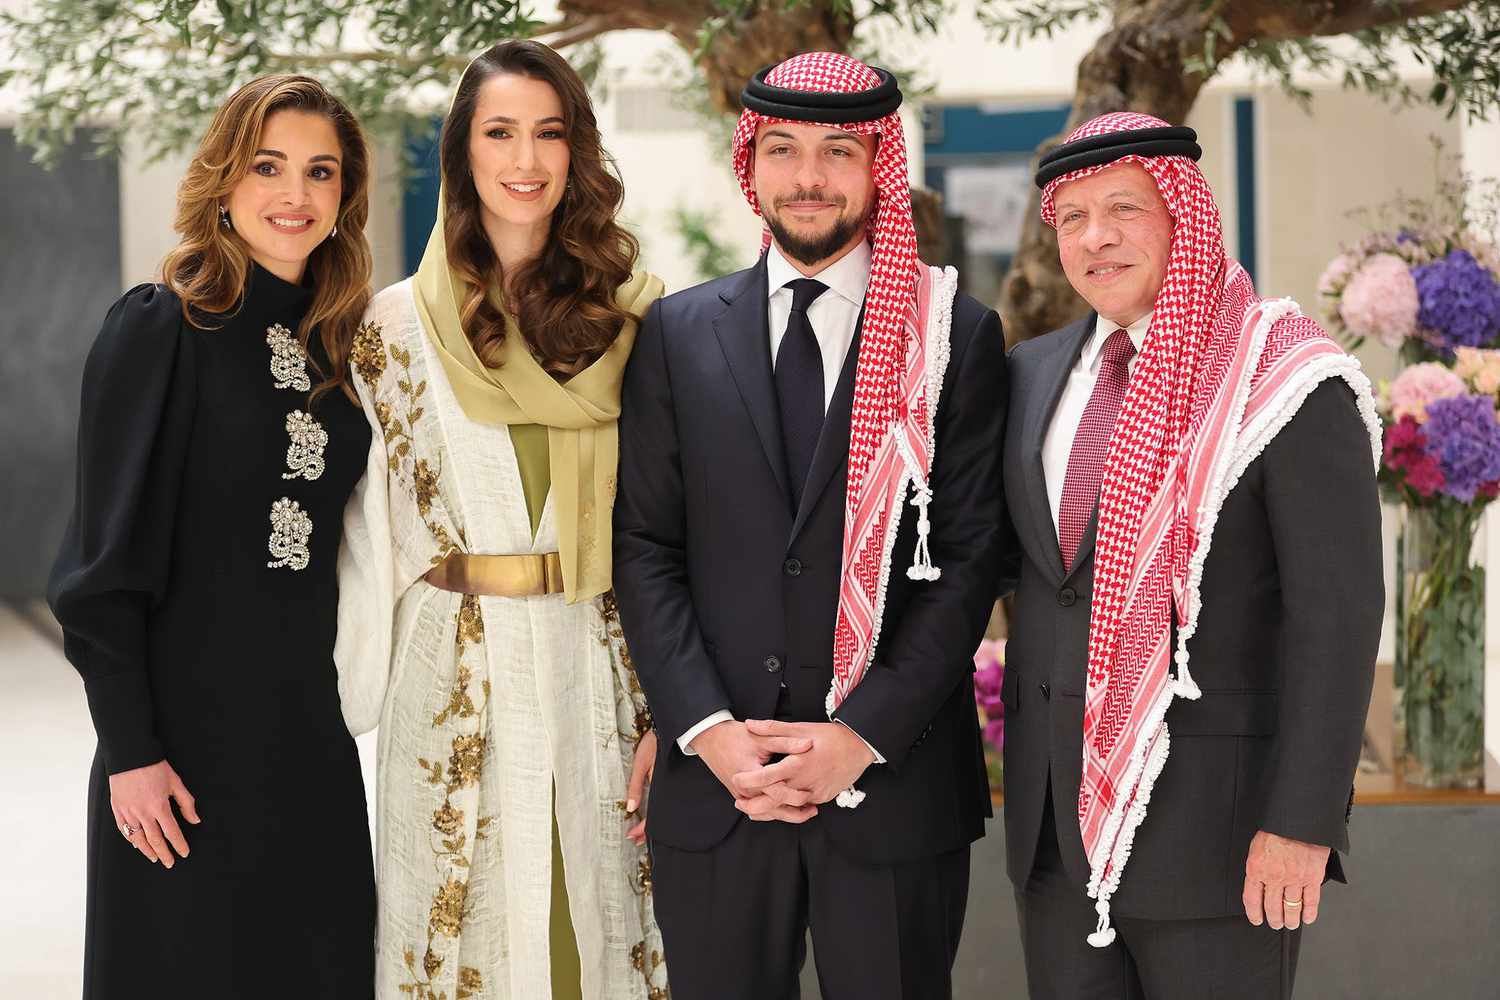 Prince Hussein of Jordan's Wedding Date Confirmed by Palace